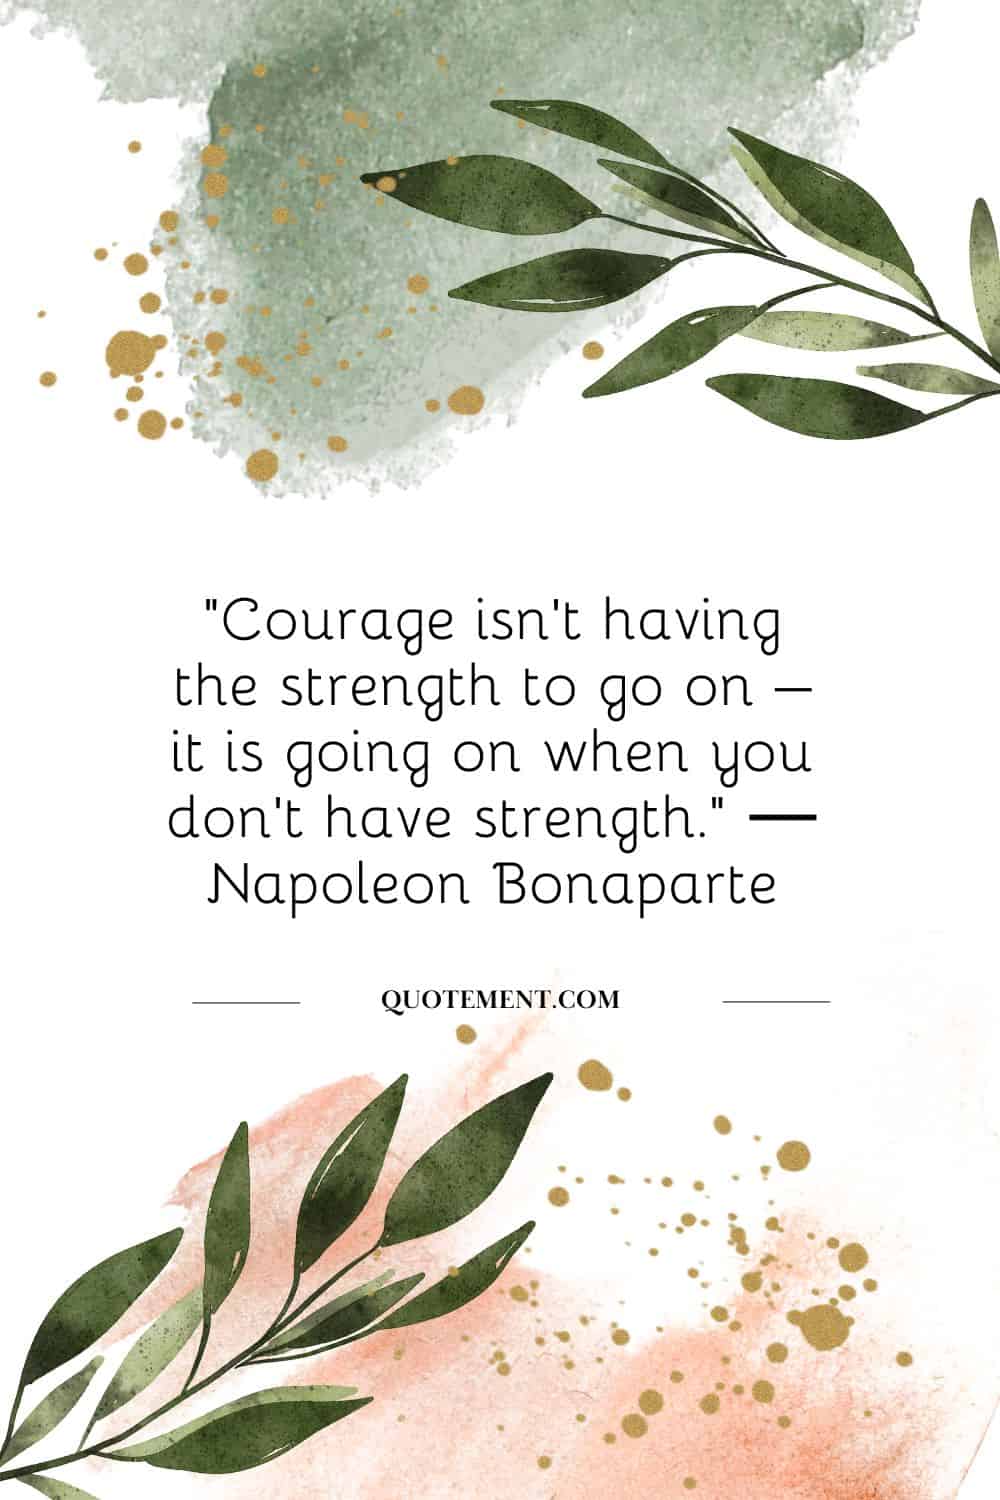 “Courage isn’t having the strength to go on – it is going on when you don’t have strength.” ― Napoleon Bonapart